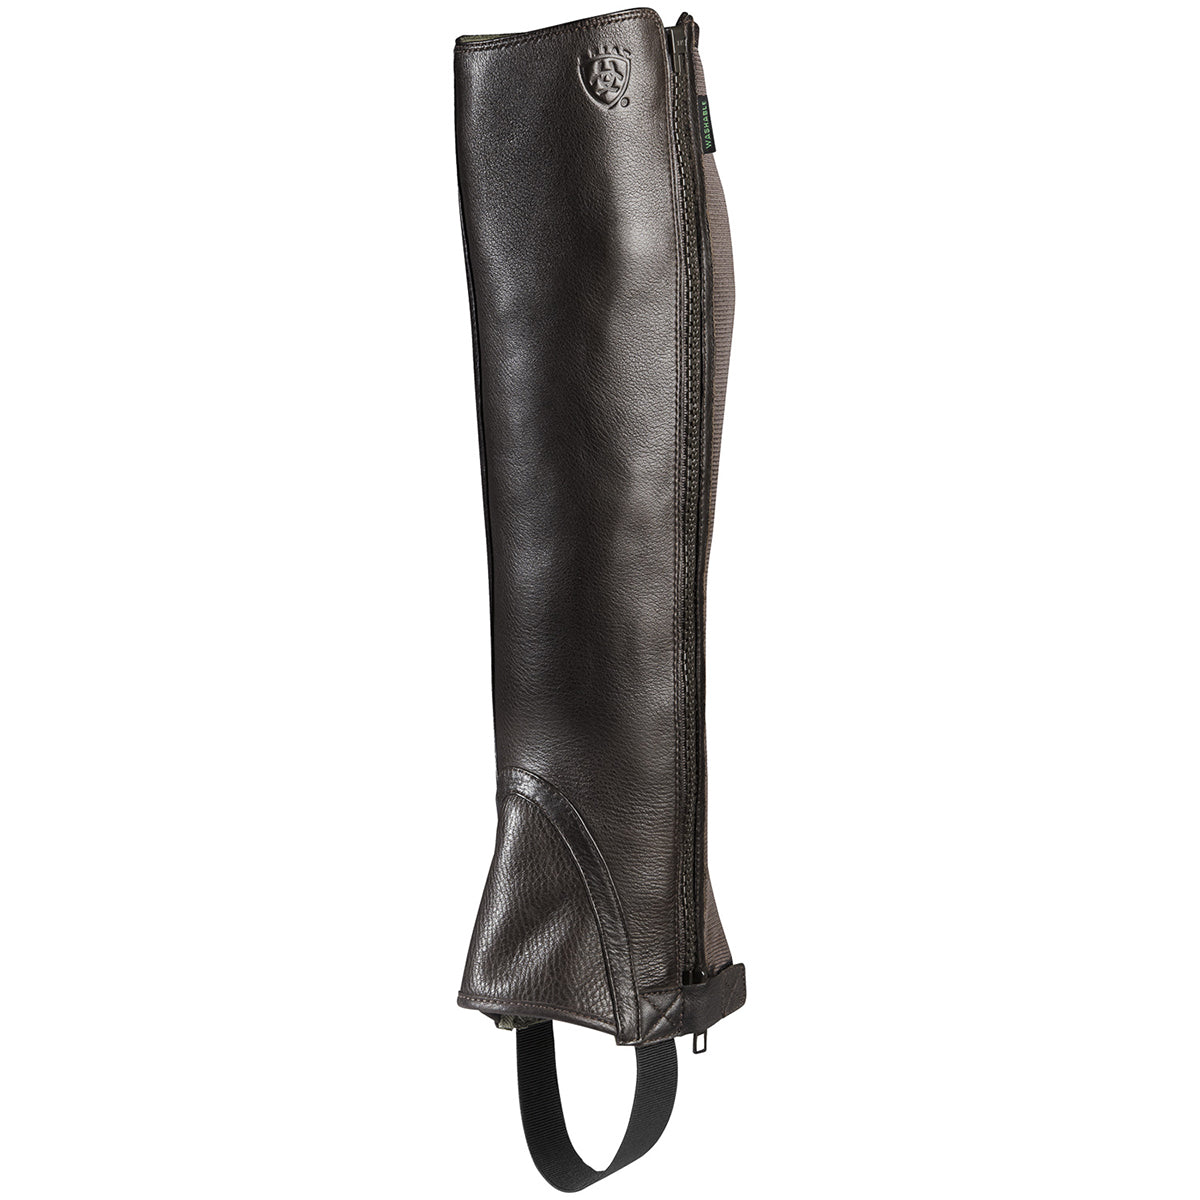 Unisex Ariat Breeze Half Chap in Chocolate from the front